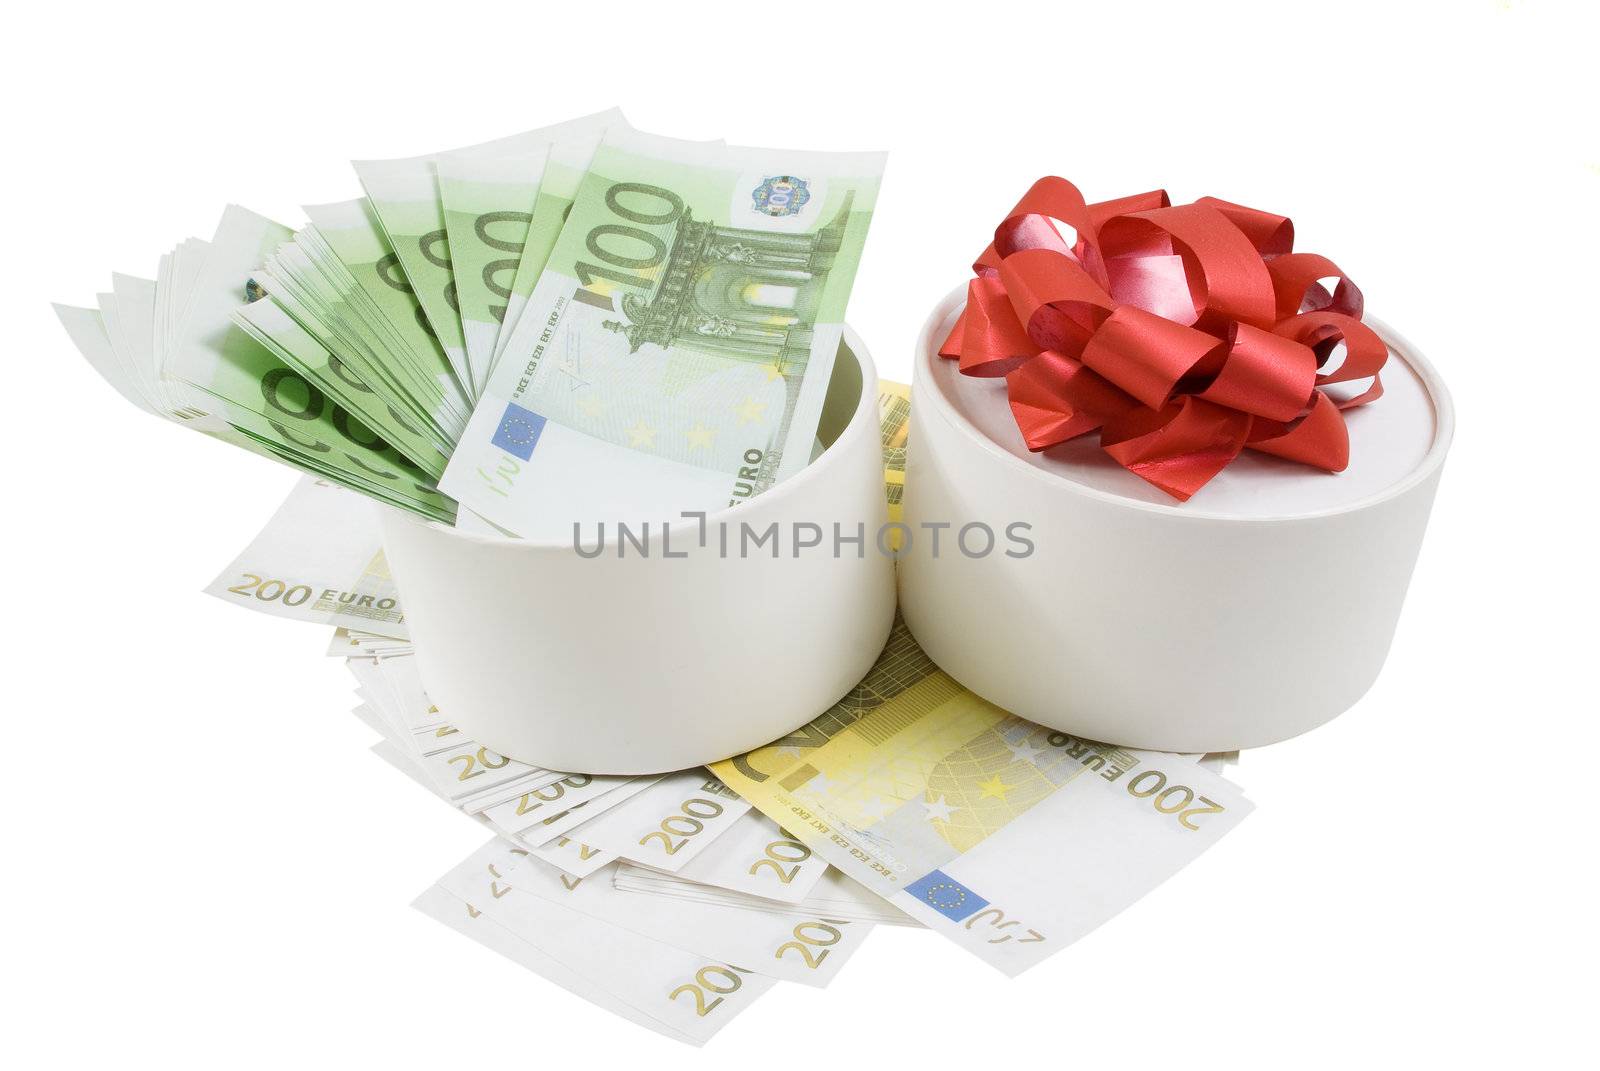 White round box withf banknotes for one and two hundred euros